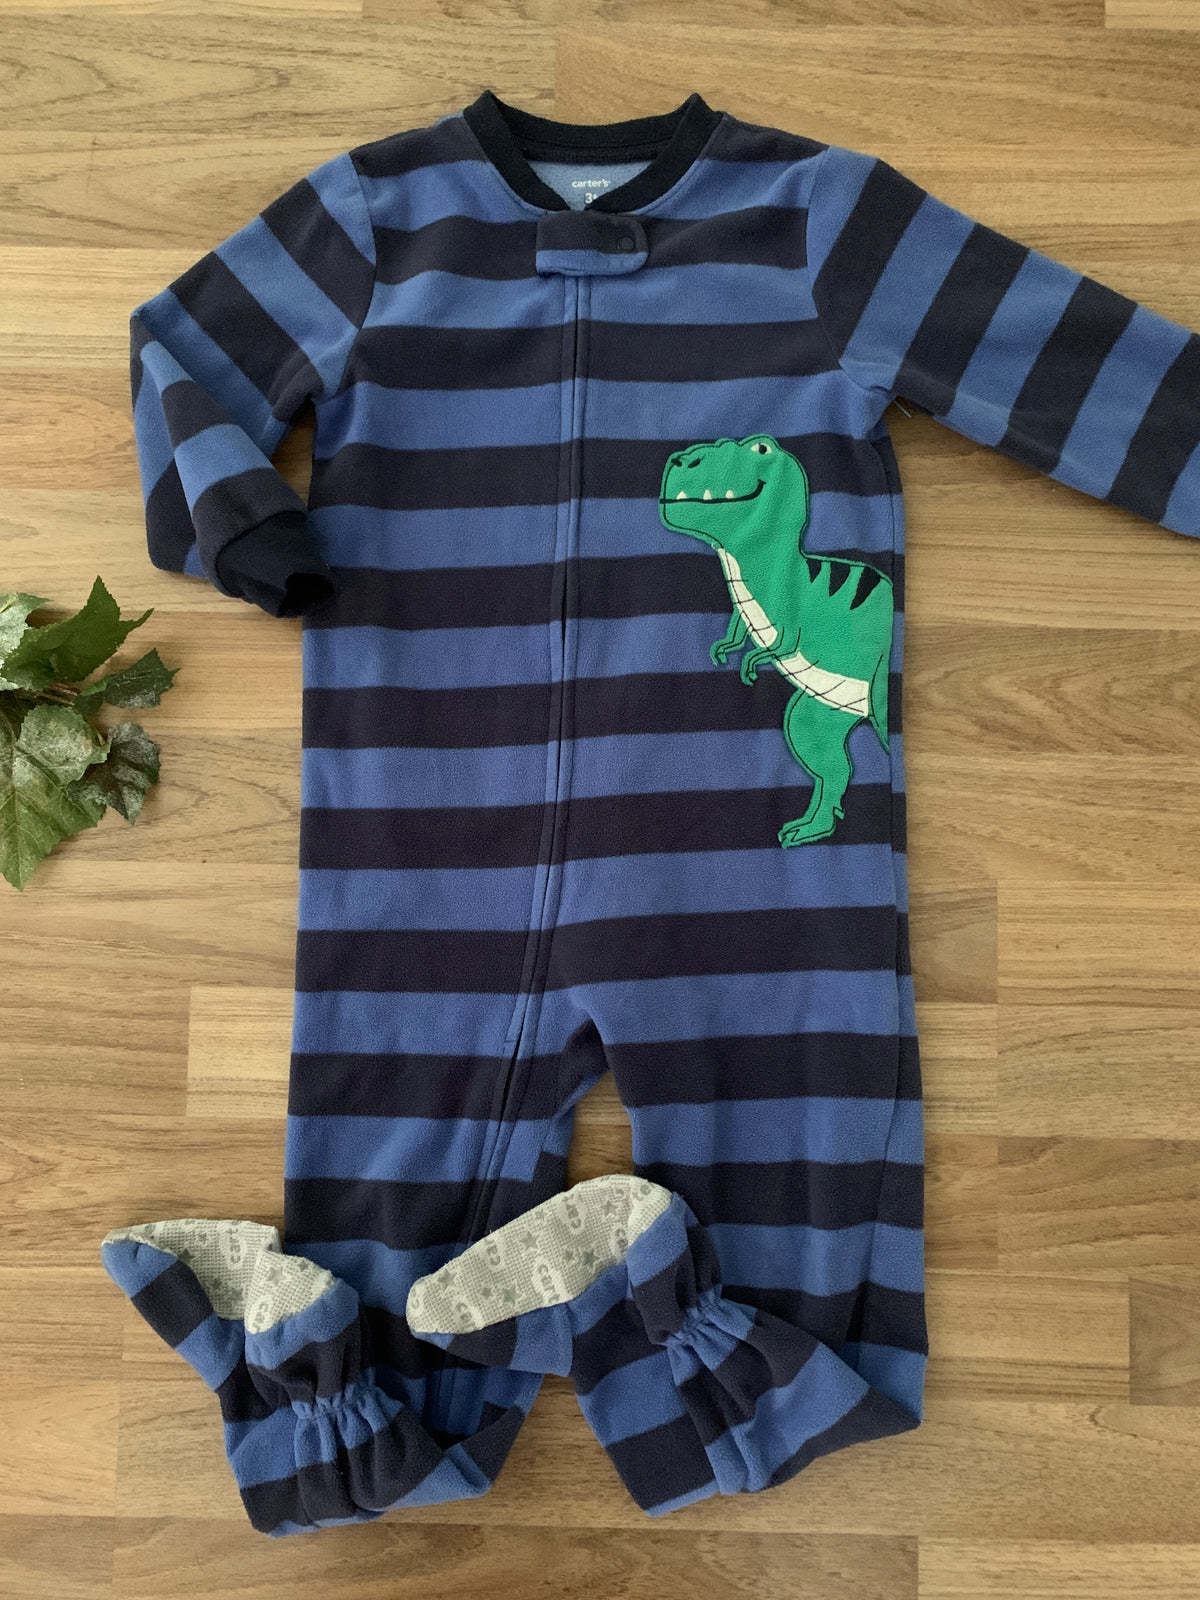 One Piece Footed Pjs (Boys Size 3)